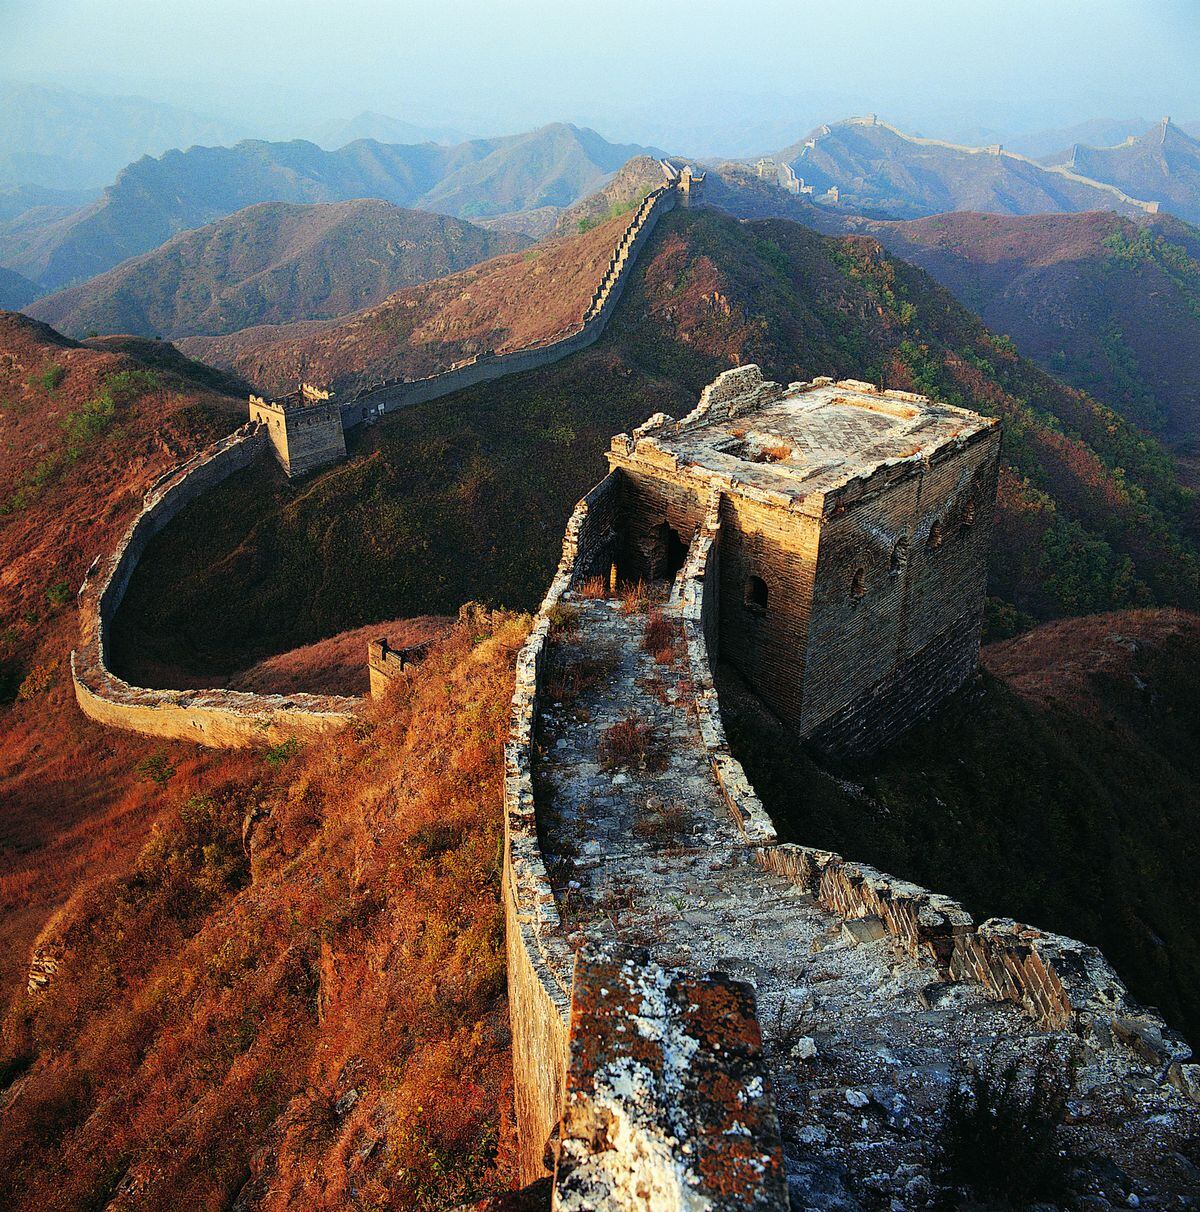 One of our bricks is missing... The Great Wall of China.